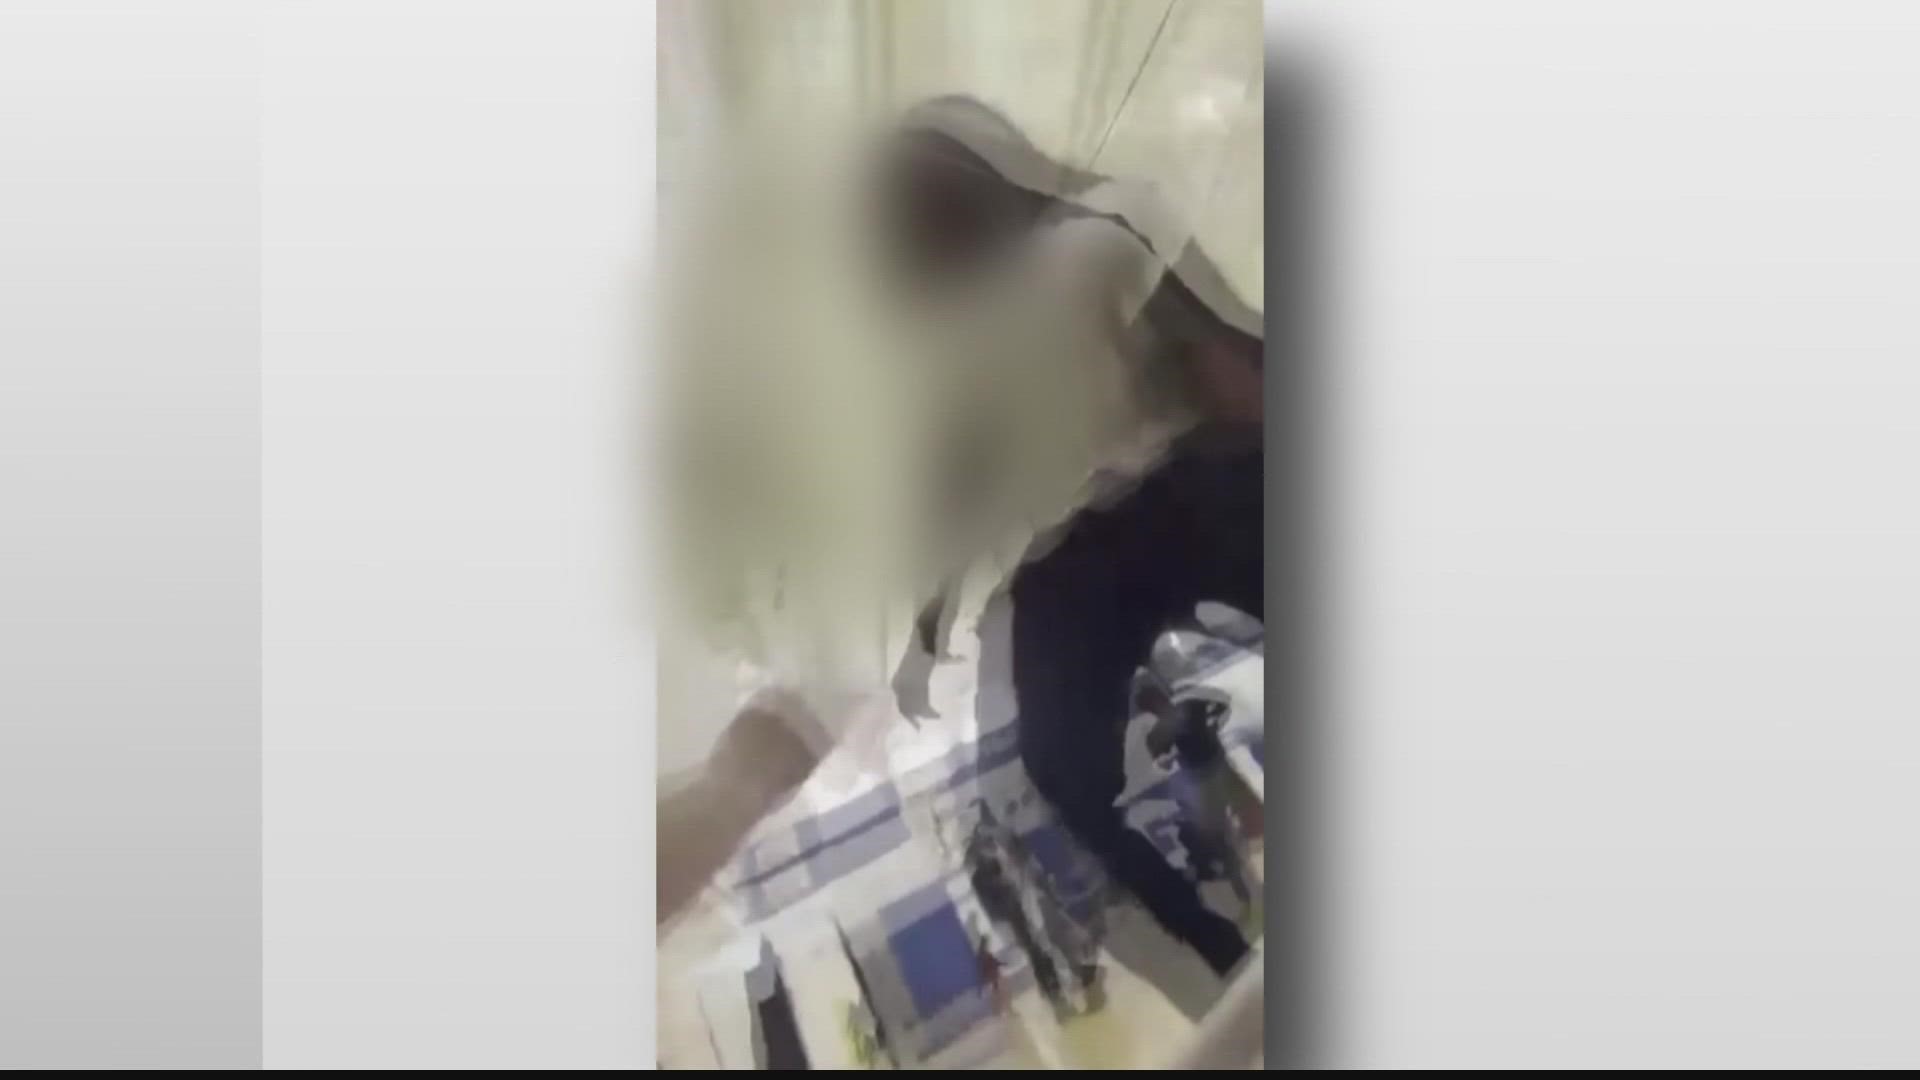 The video shows the Black student then slapping the white students. Parents said the Black teen was punished, but the white teen initially was not.